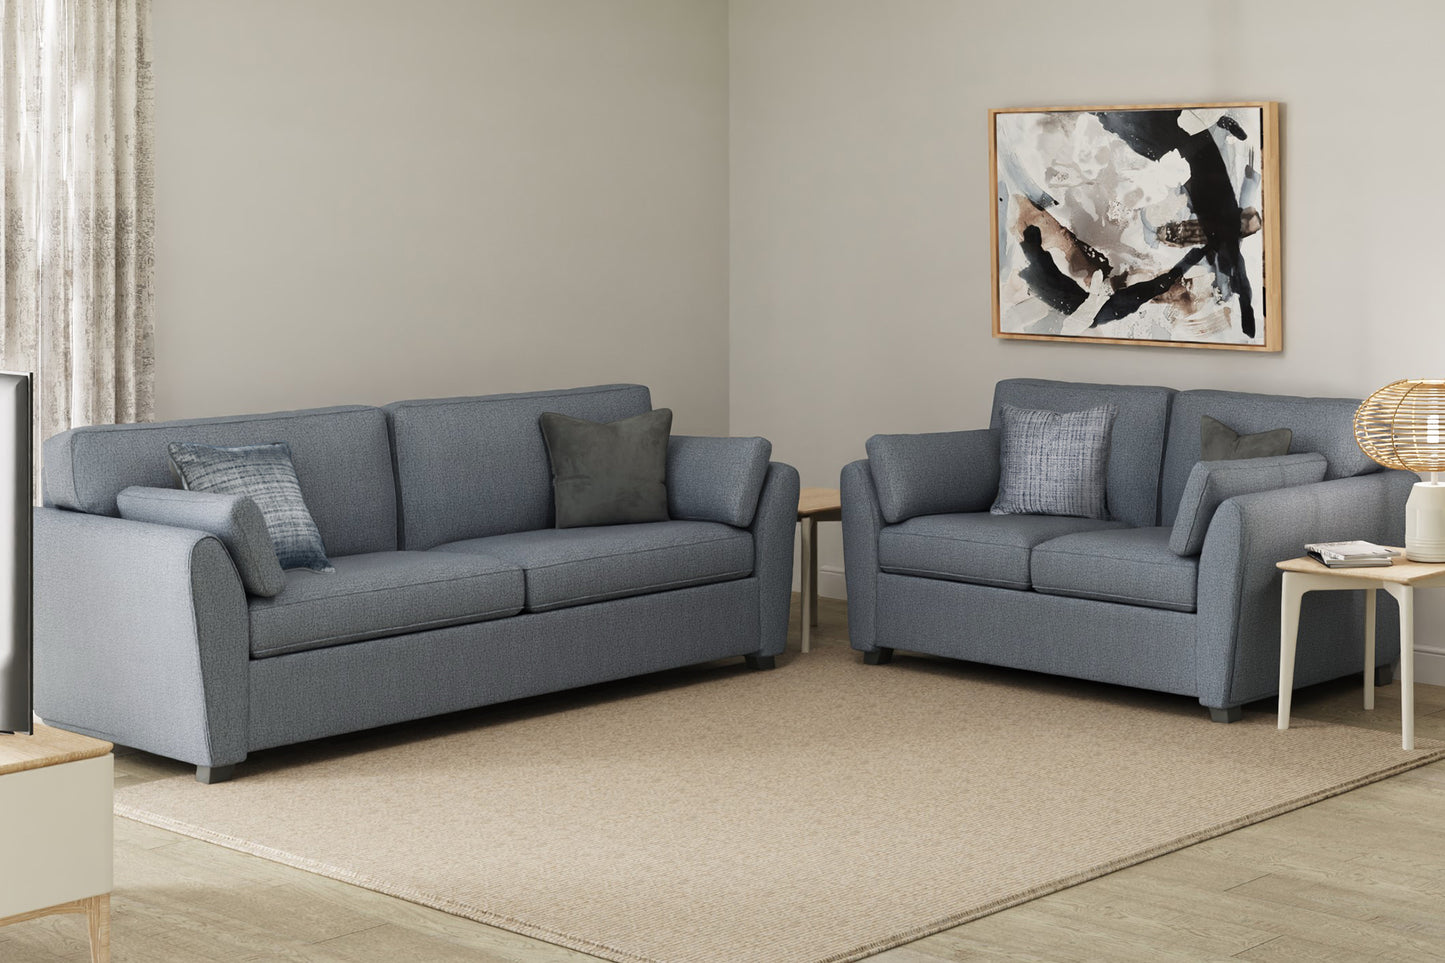 Cantrell 2 Seater Sofa - Blue